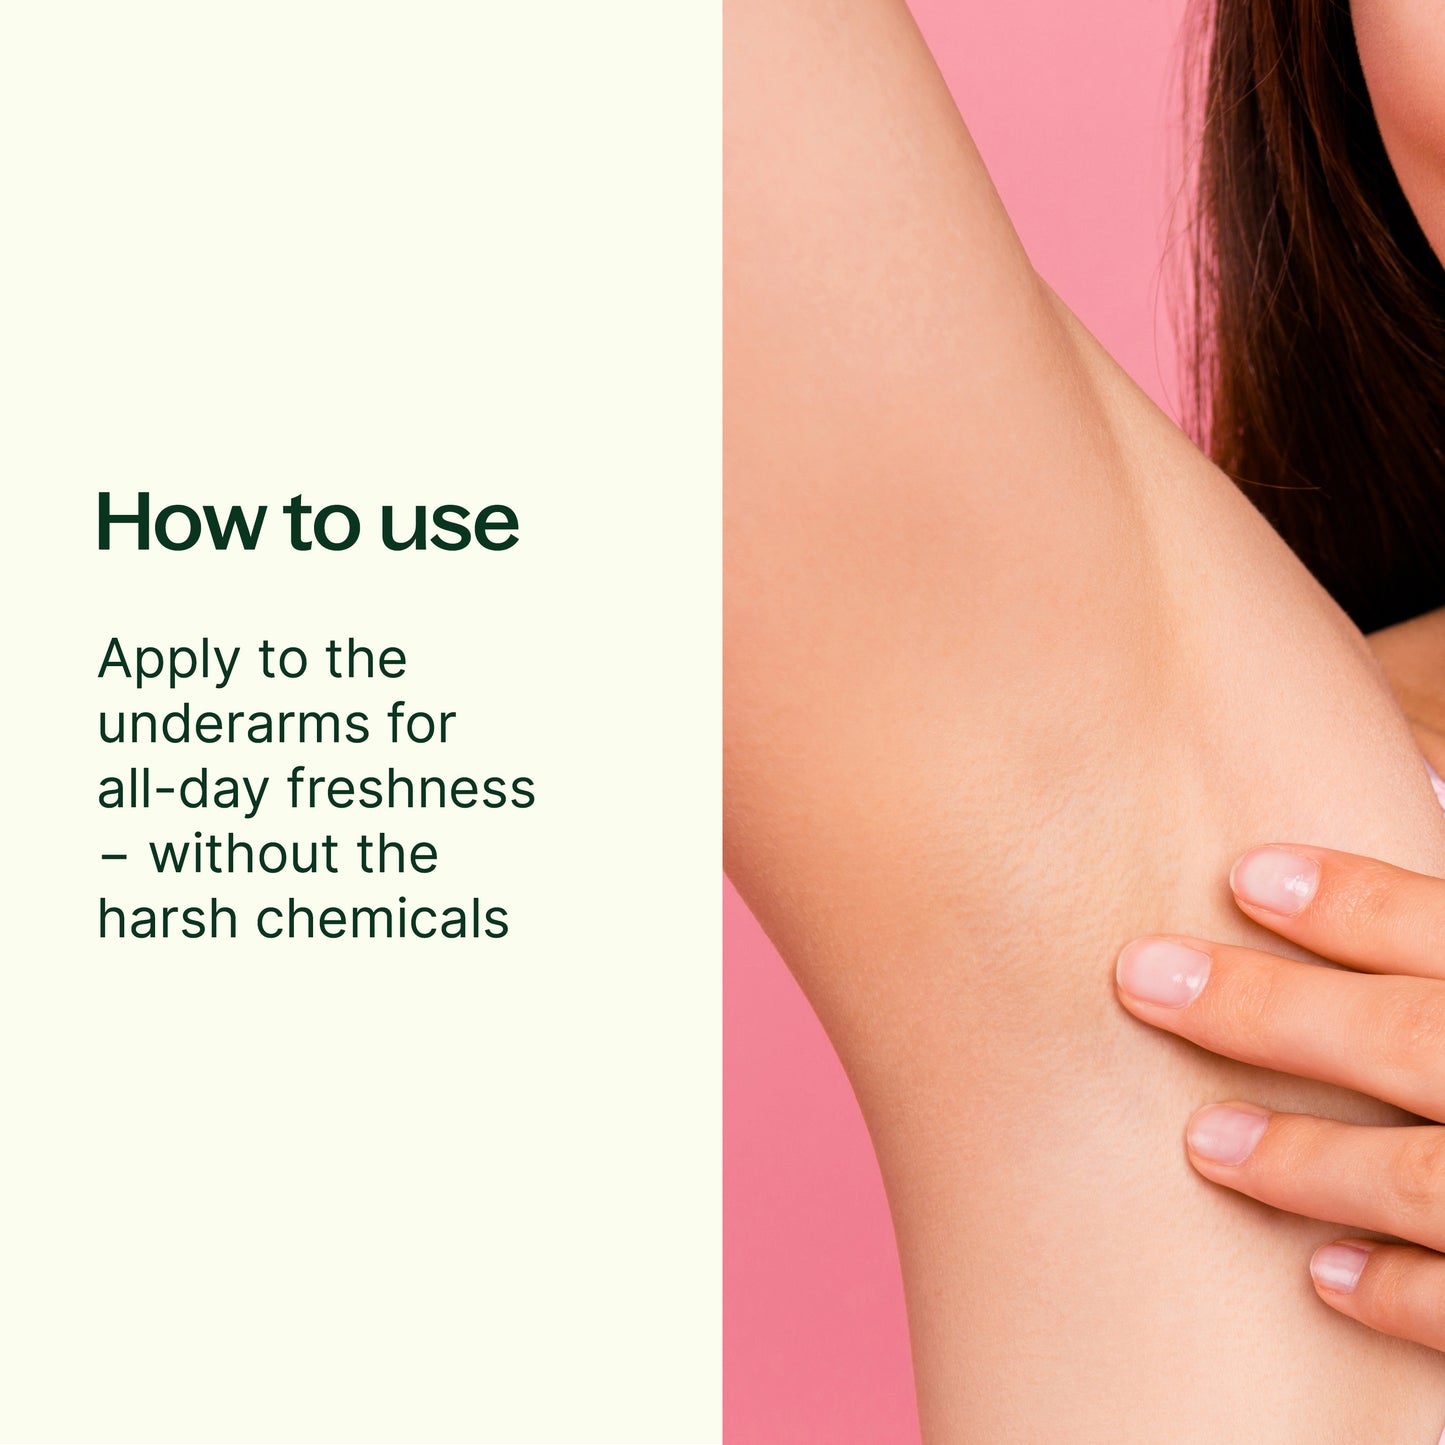 how to use: apply to underarms